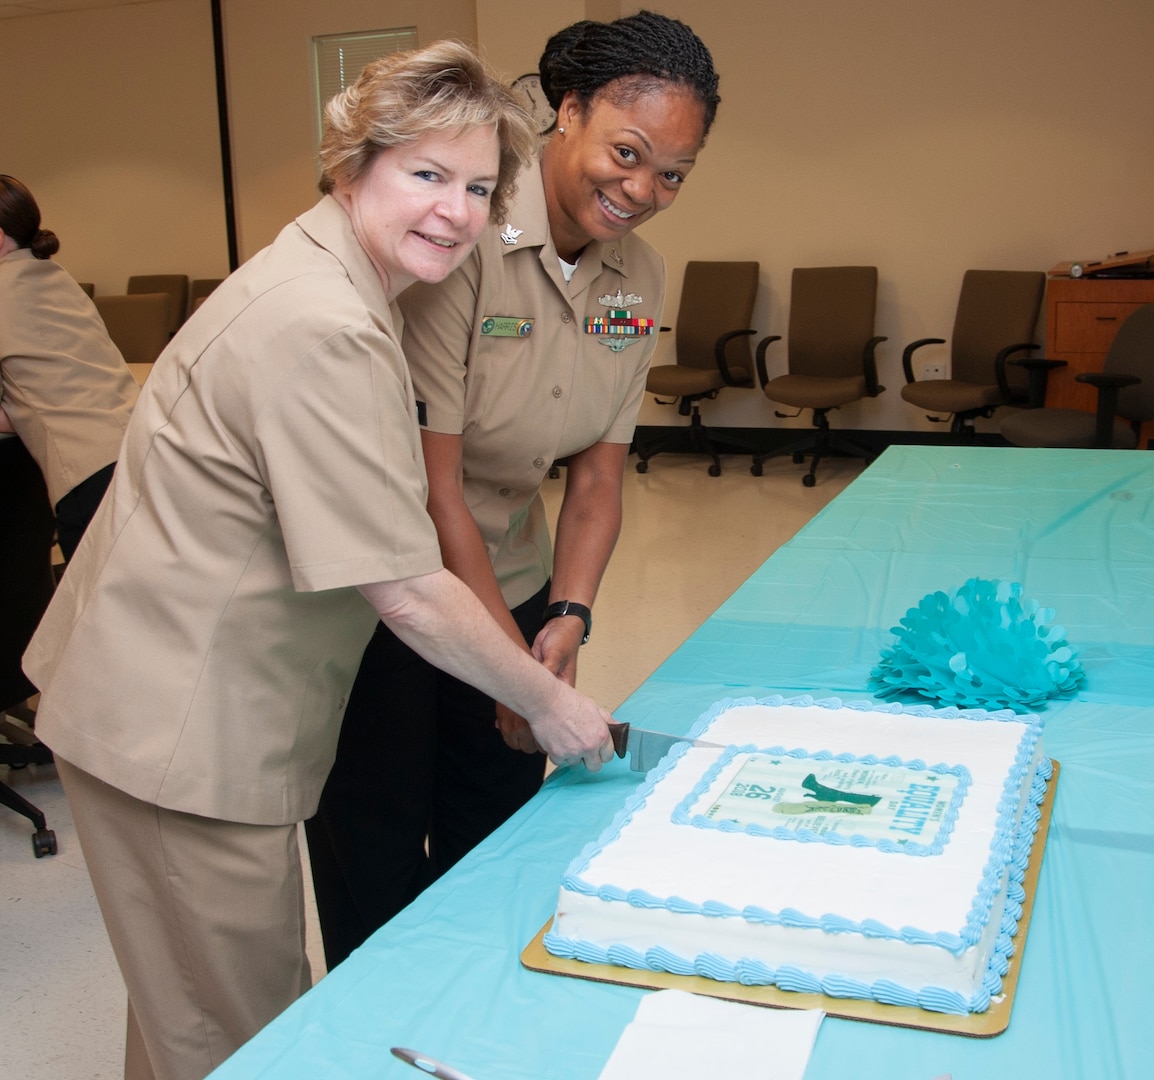 Capt. Maryann Mattonen (left), commanding officer, Navy Medicine Training Support Center, and Petty Officer 2nd Class Tereca Harris, an instructor with the Hospital Corpsman Basic program at the Medical Education and Training Campus at Joint Base San Antonio-Fort Sam Houston, cut a cake in celebration of Women’s Equality Day.